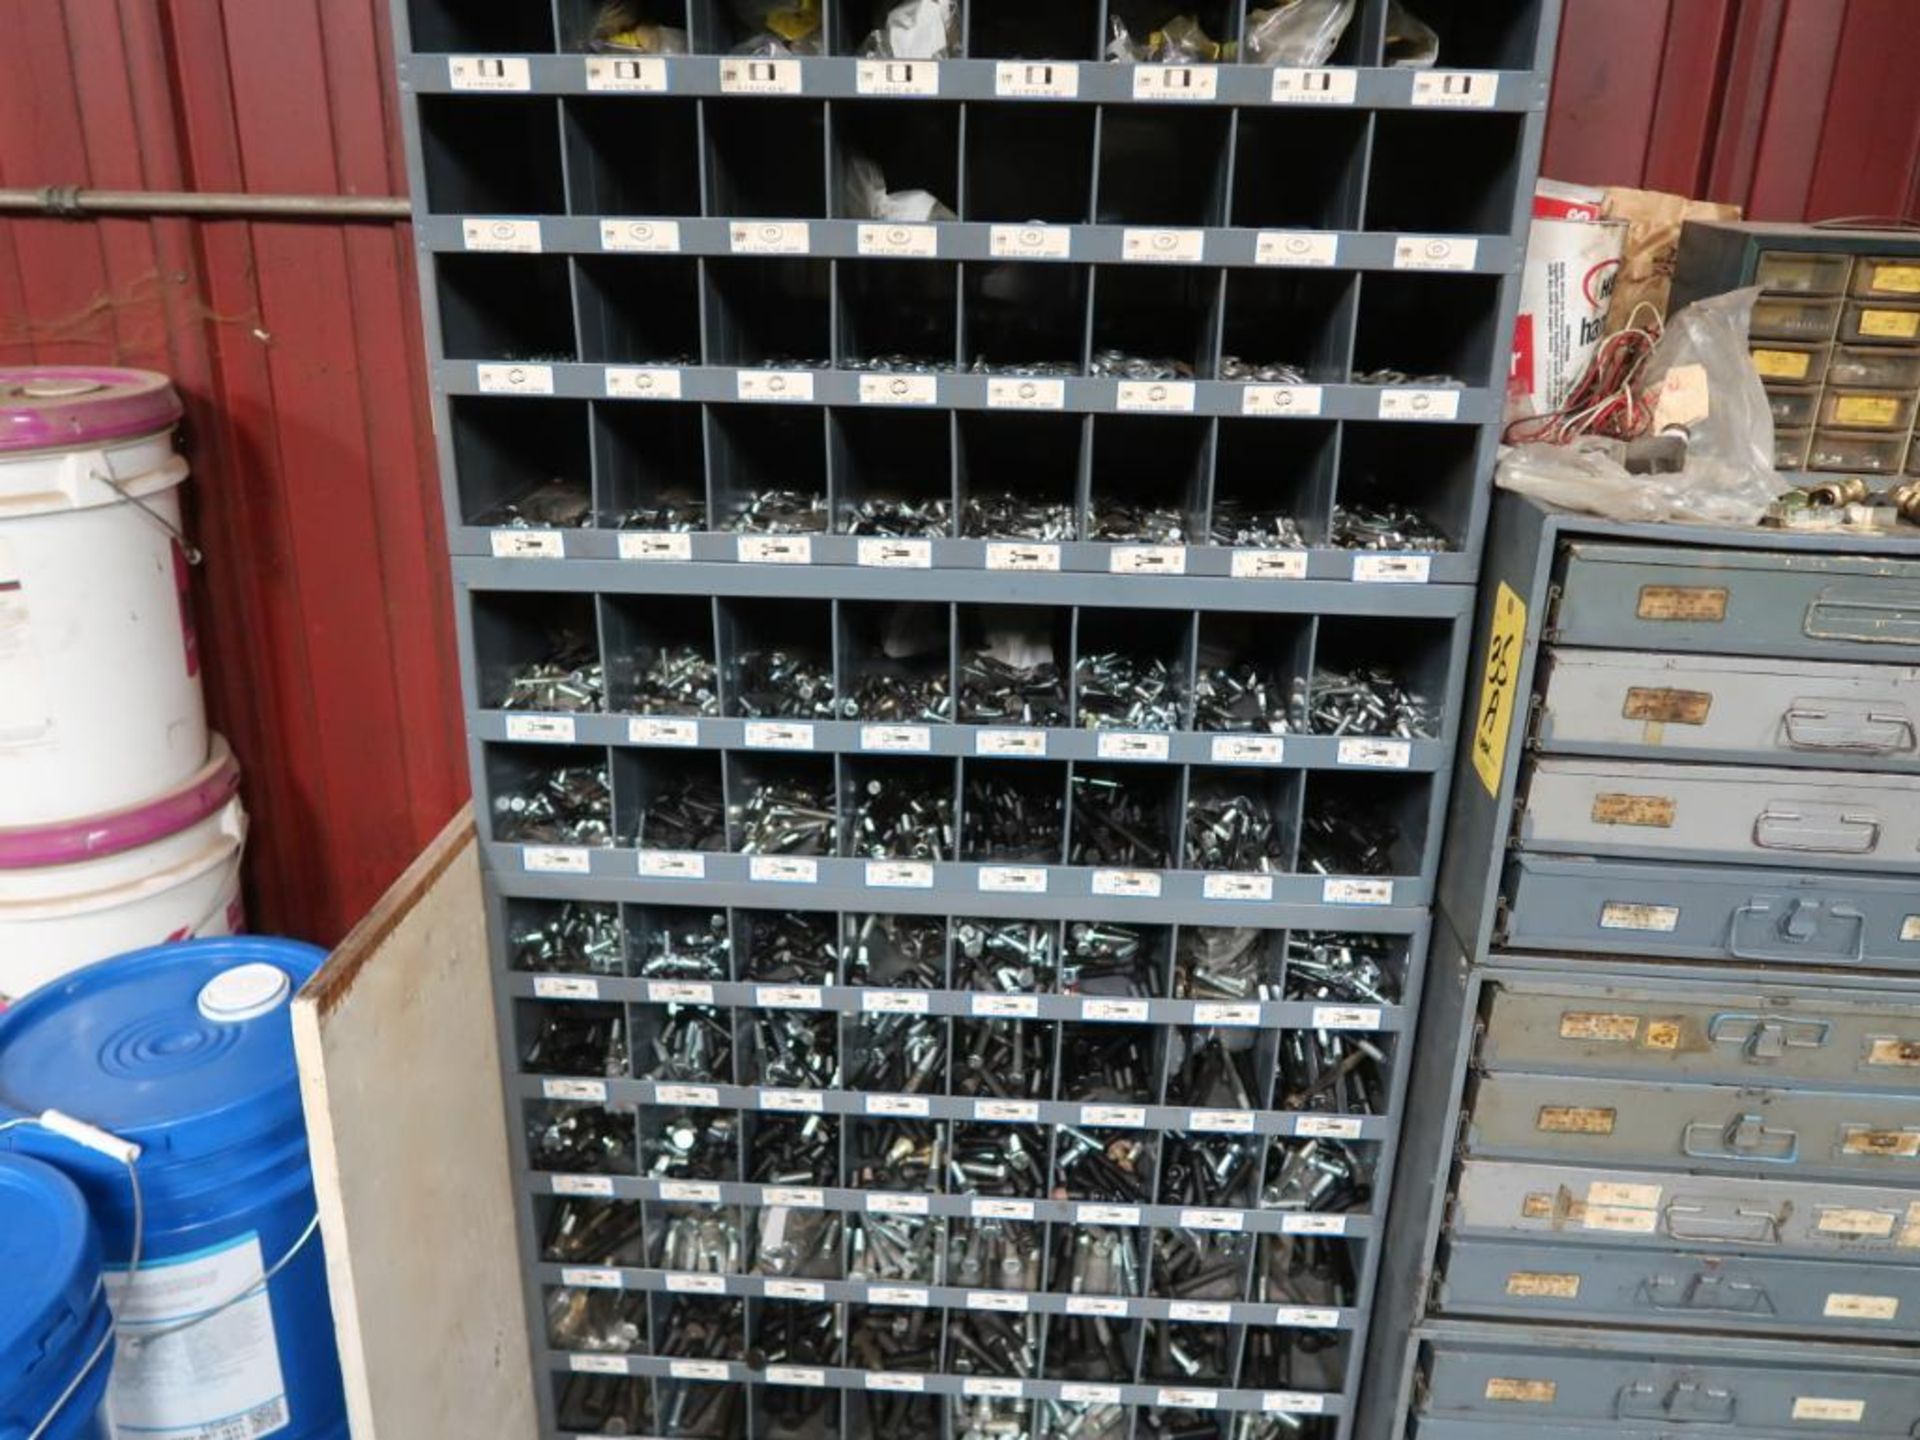 LOT: Large Quantity of Fasteners with Cubby Hole Shelving & Drawers - Image 2 of 7